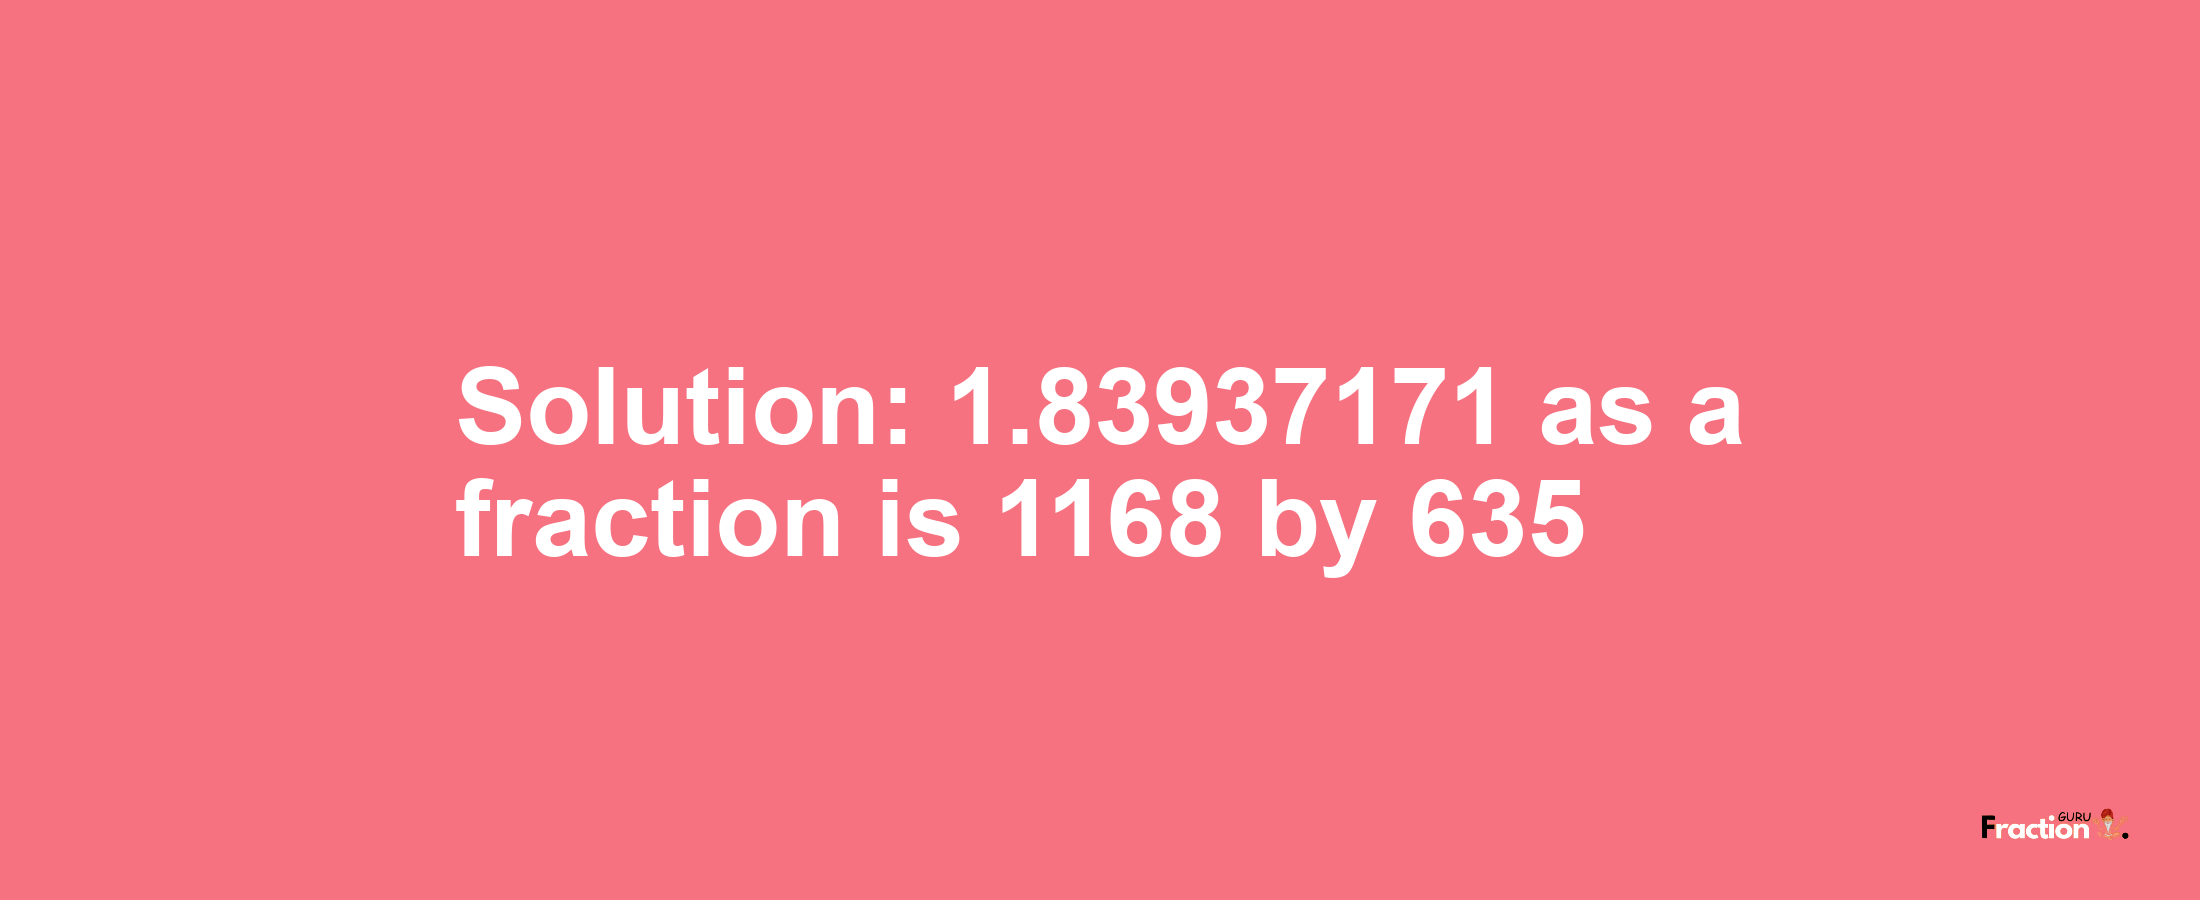 Solution:1.83937171 as a fraction is 1168/635